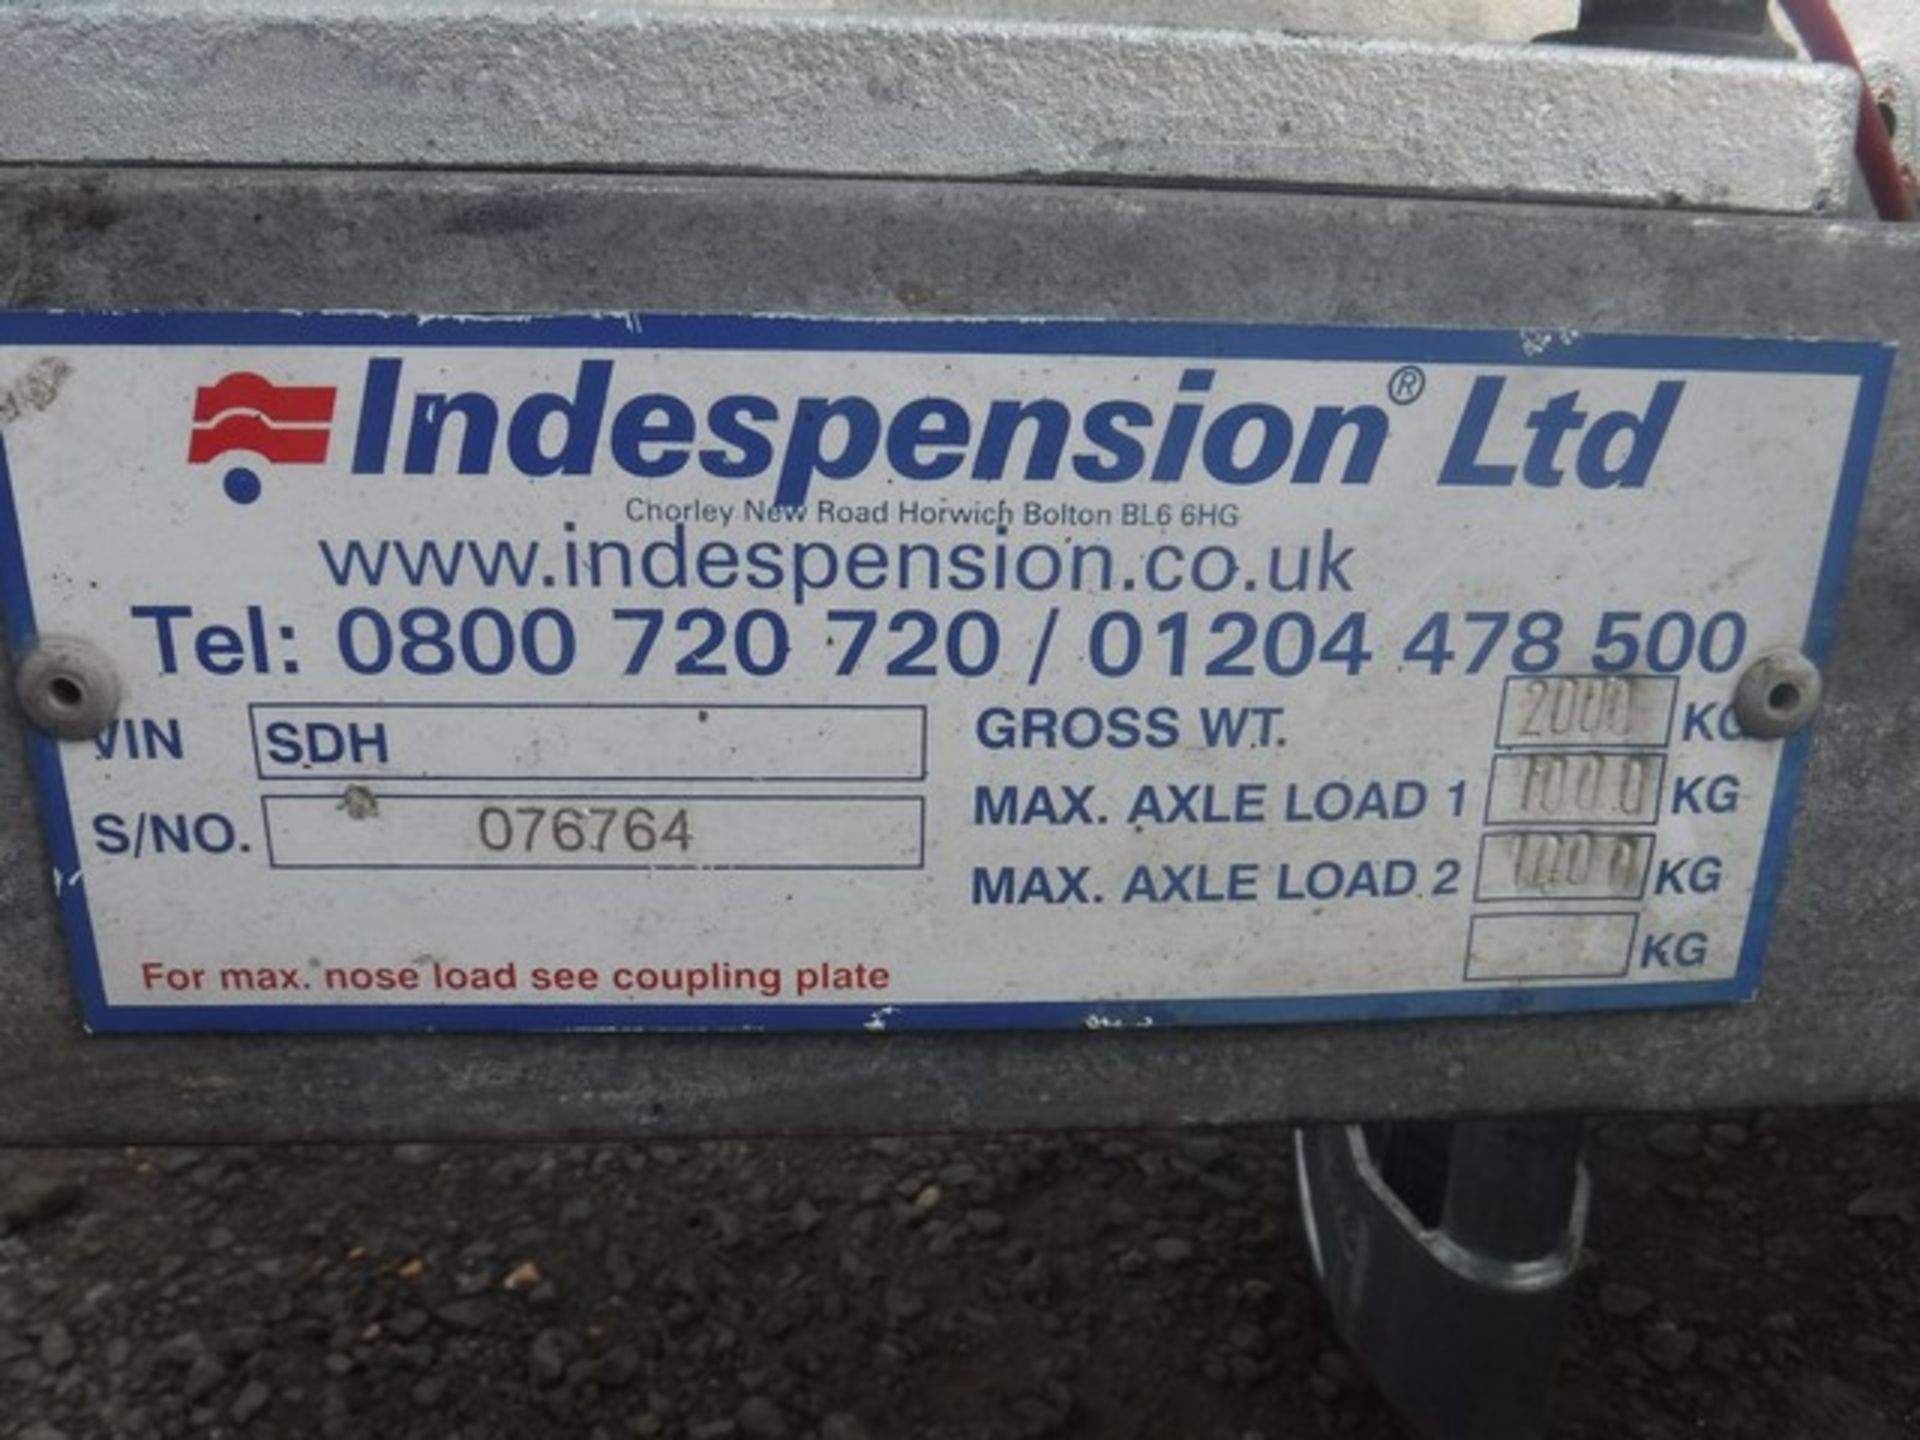 2003 INDESPENSION 18' X 6' twin axle trailer c/w 5' ramp. Max gross weight 2000kgs. VIN 076764. Asse - Image 10 of 10